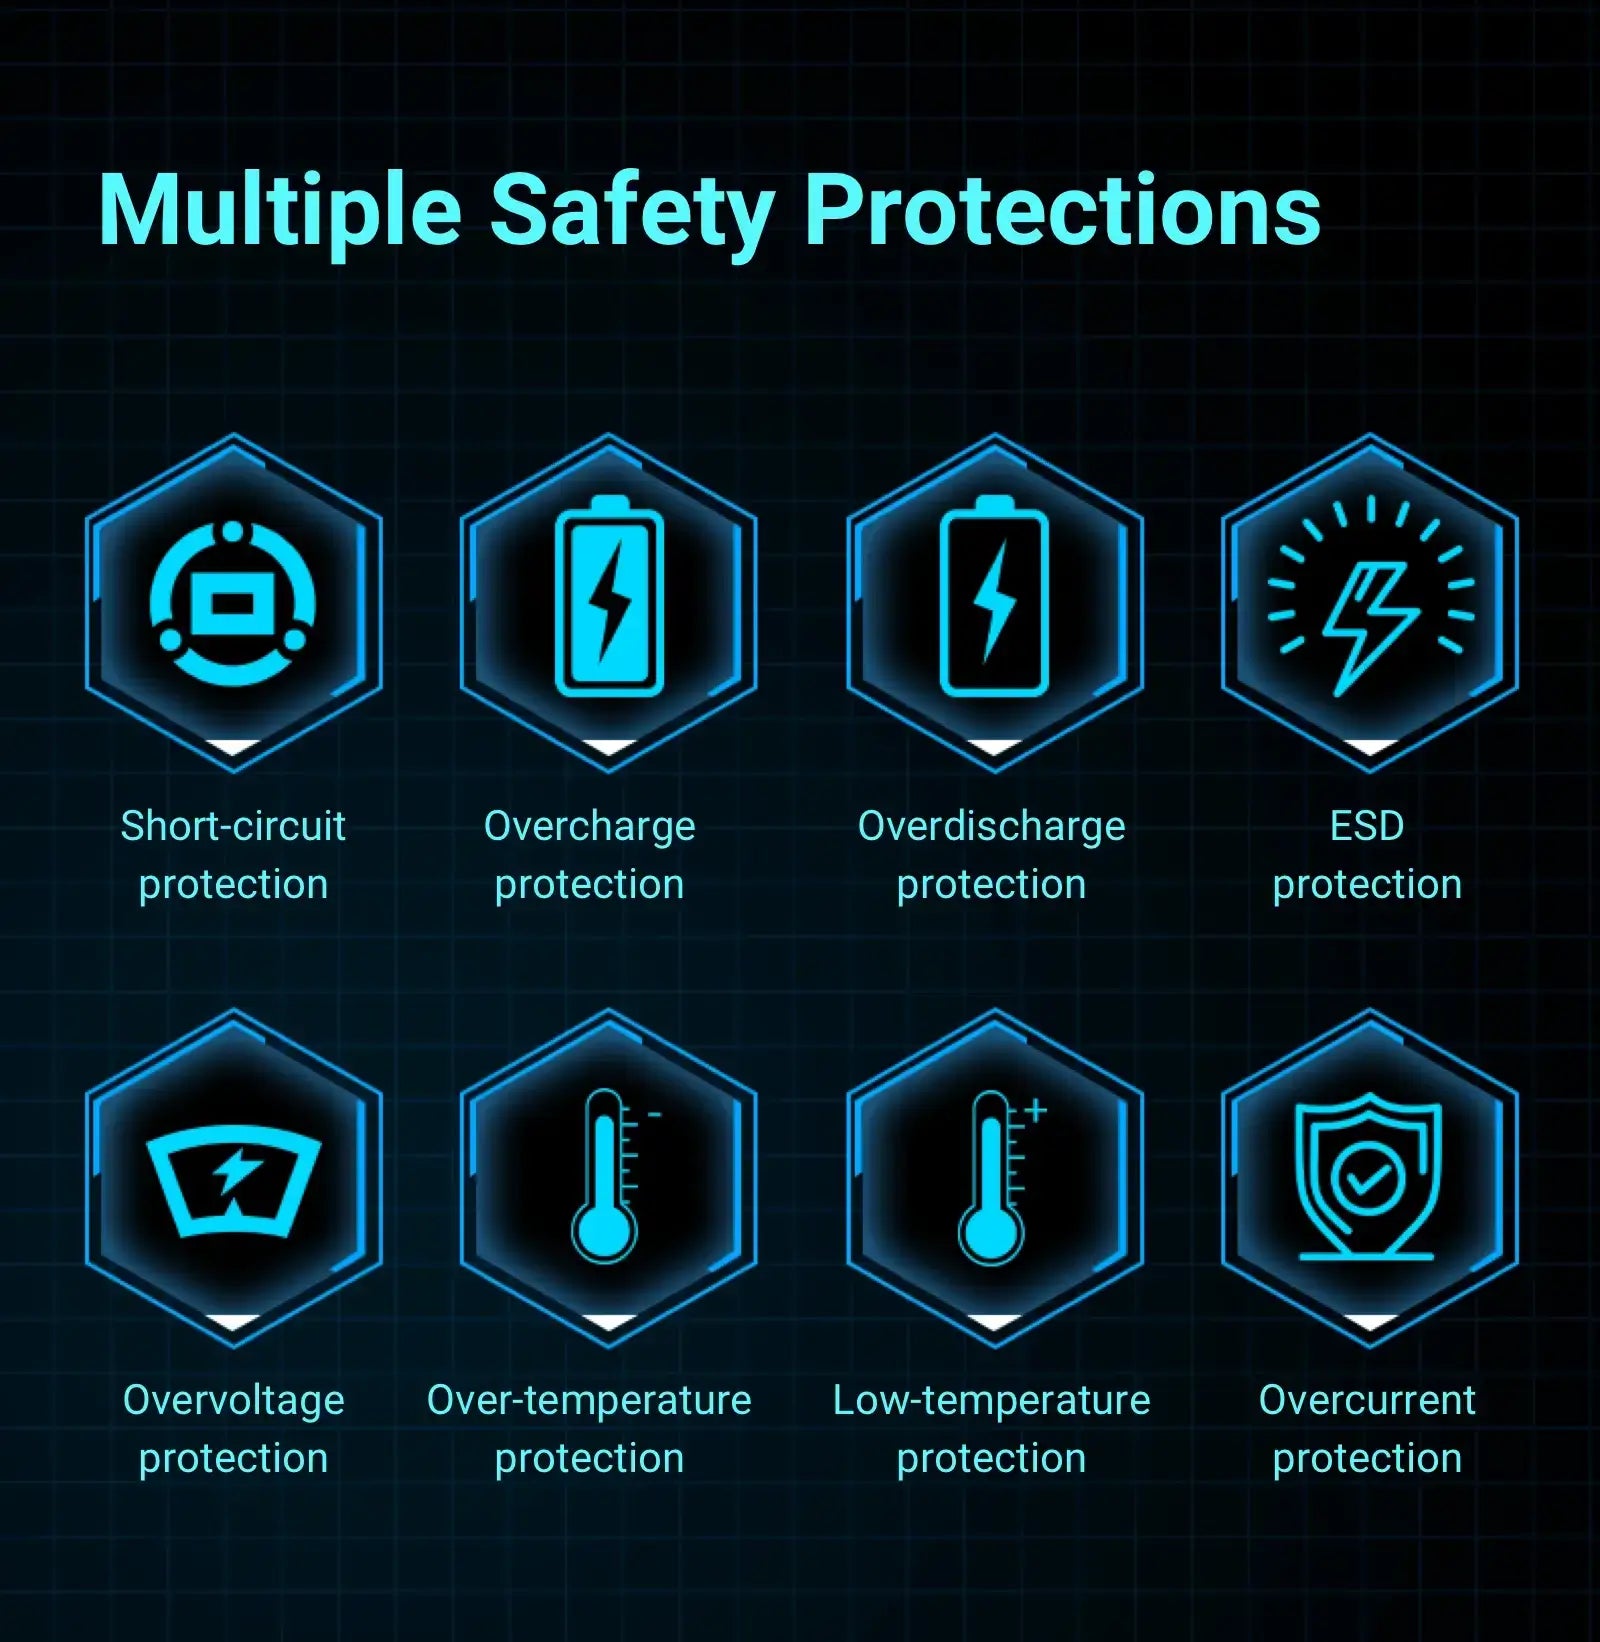 Multiple Safety Protections